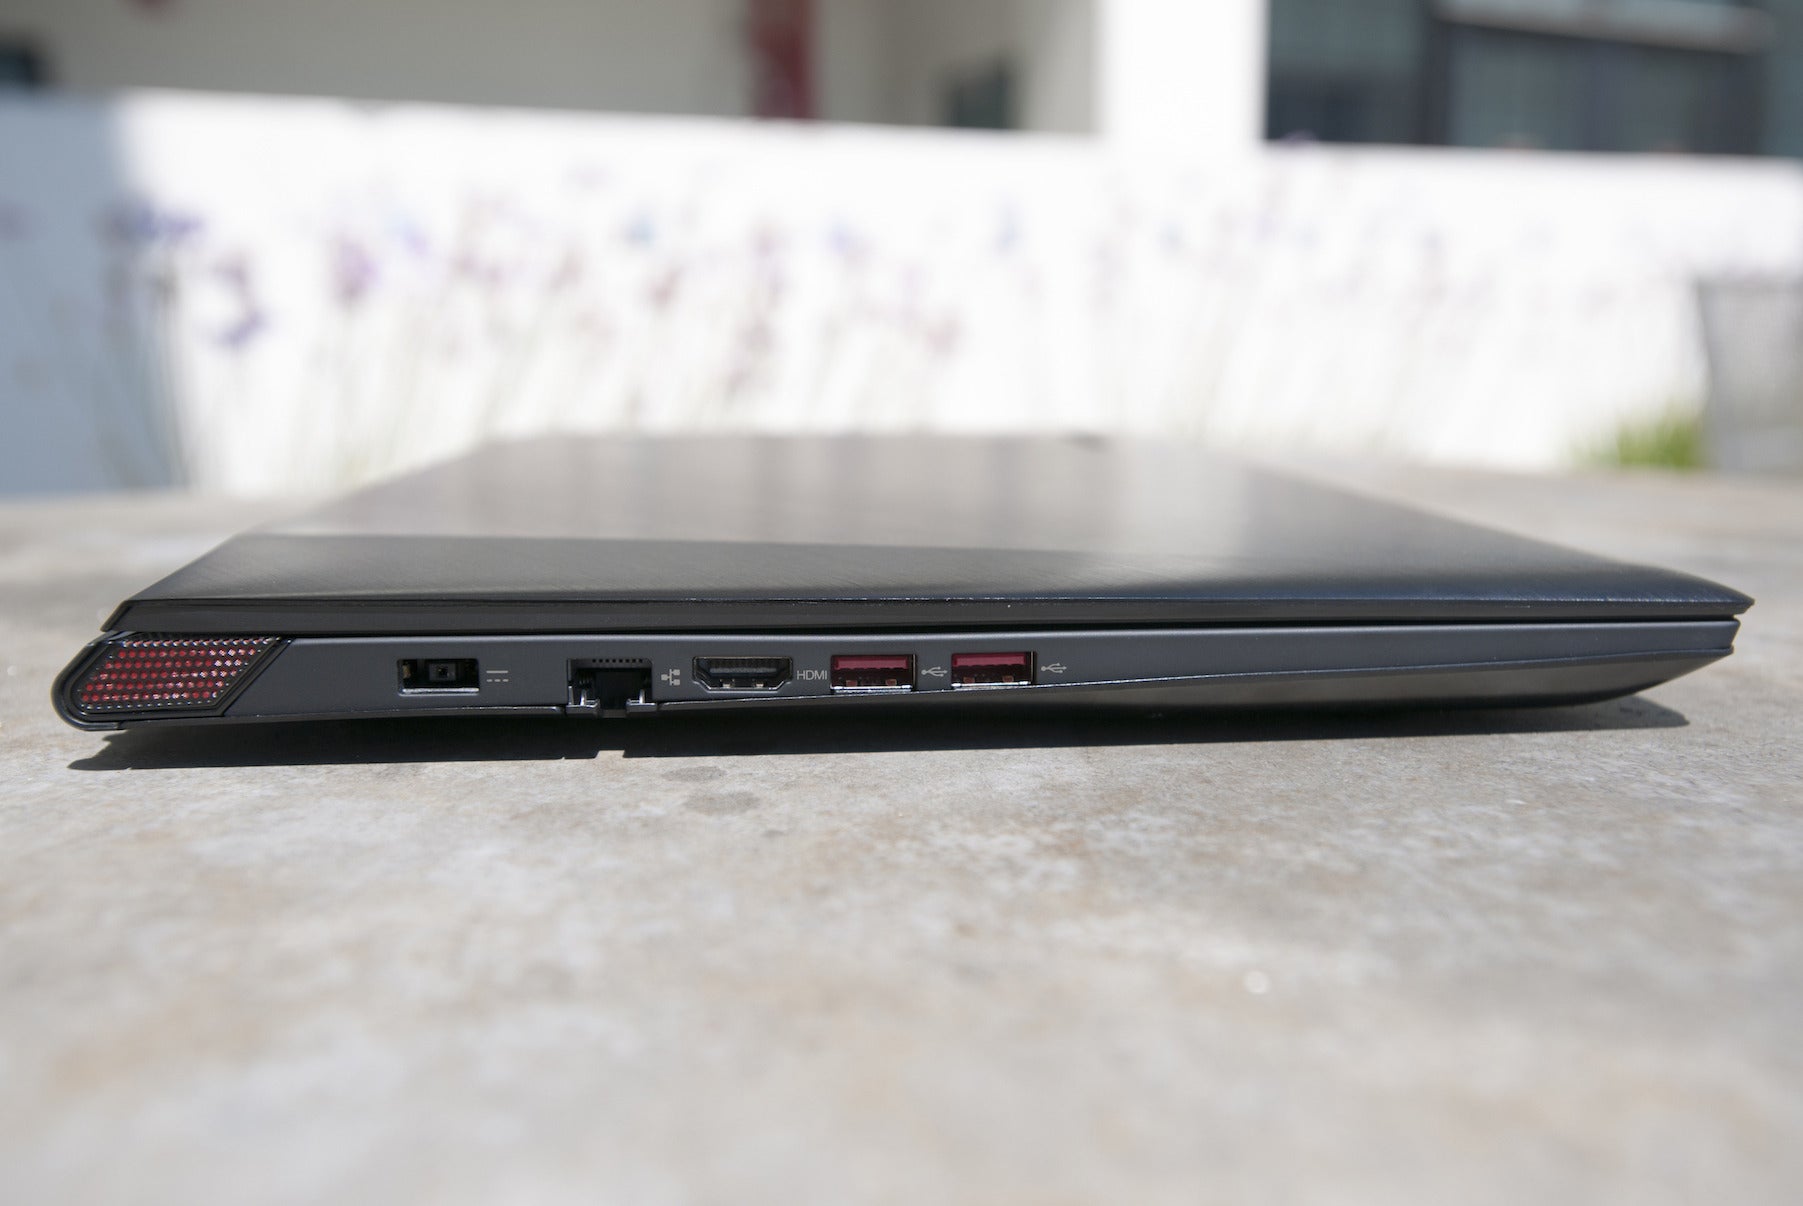 Distill logo propel Lenovo Y50 review: This $1200 gaming laptop needs a better display | PCWorld